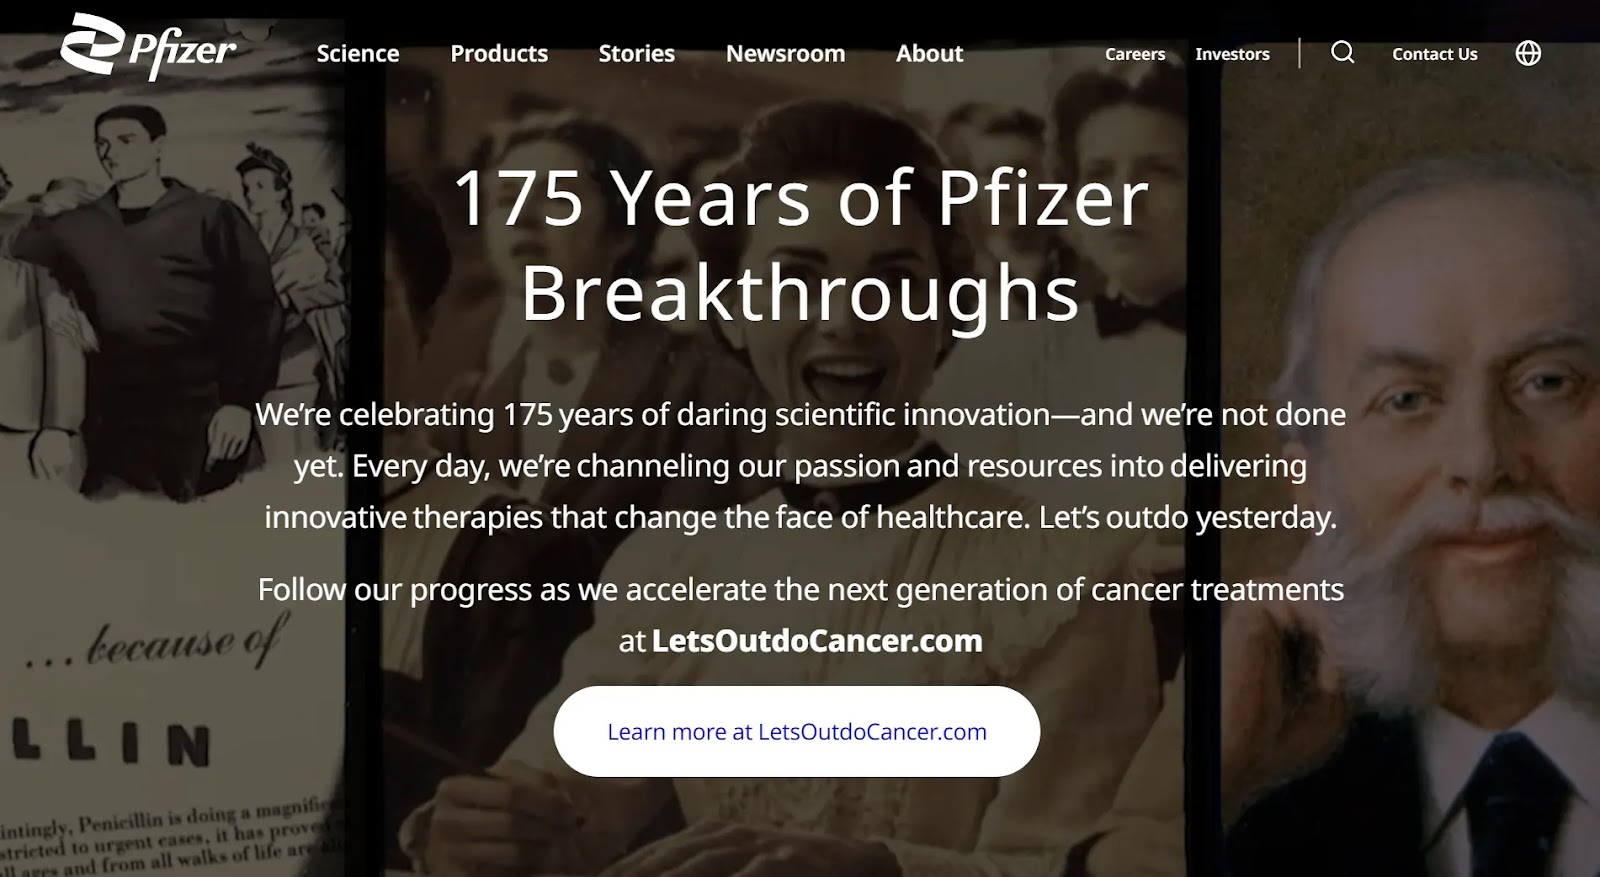 Pfizer's landing page celebrating 175 years of existence